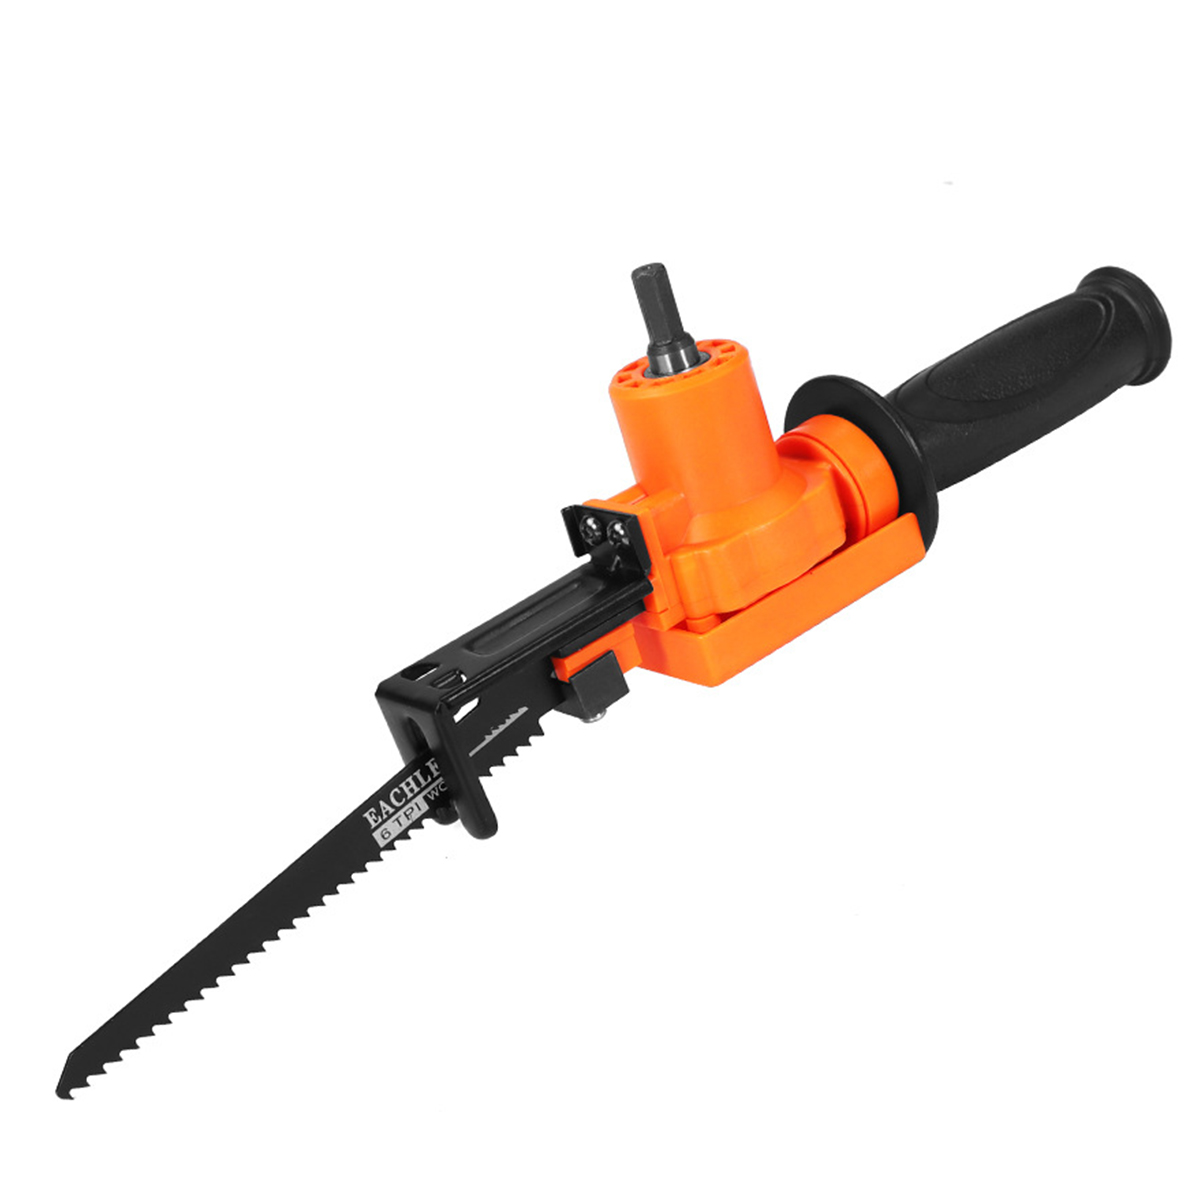 Becornce Reciprocating Saw Adapter Electric Drill Modified Electric Saw Hand Tool Wood Metal Cutter Long Service Life Durability